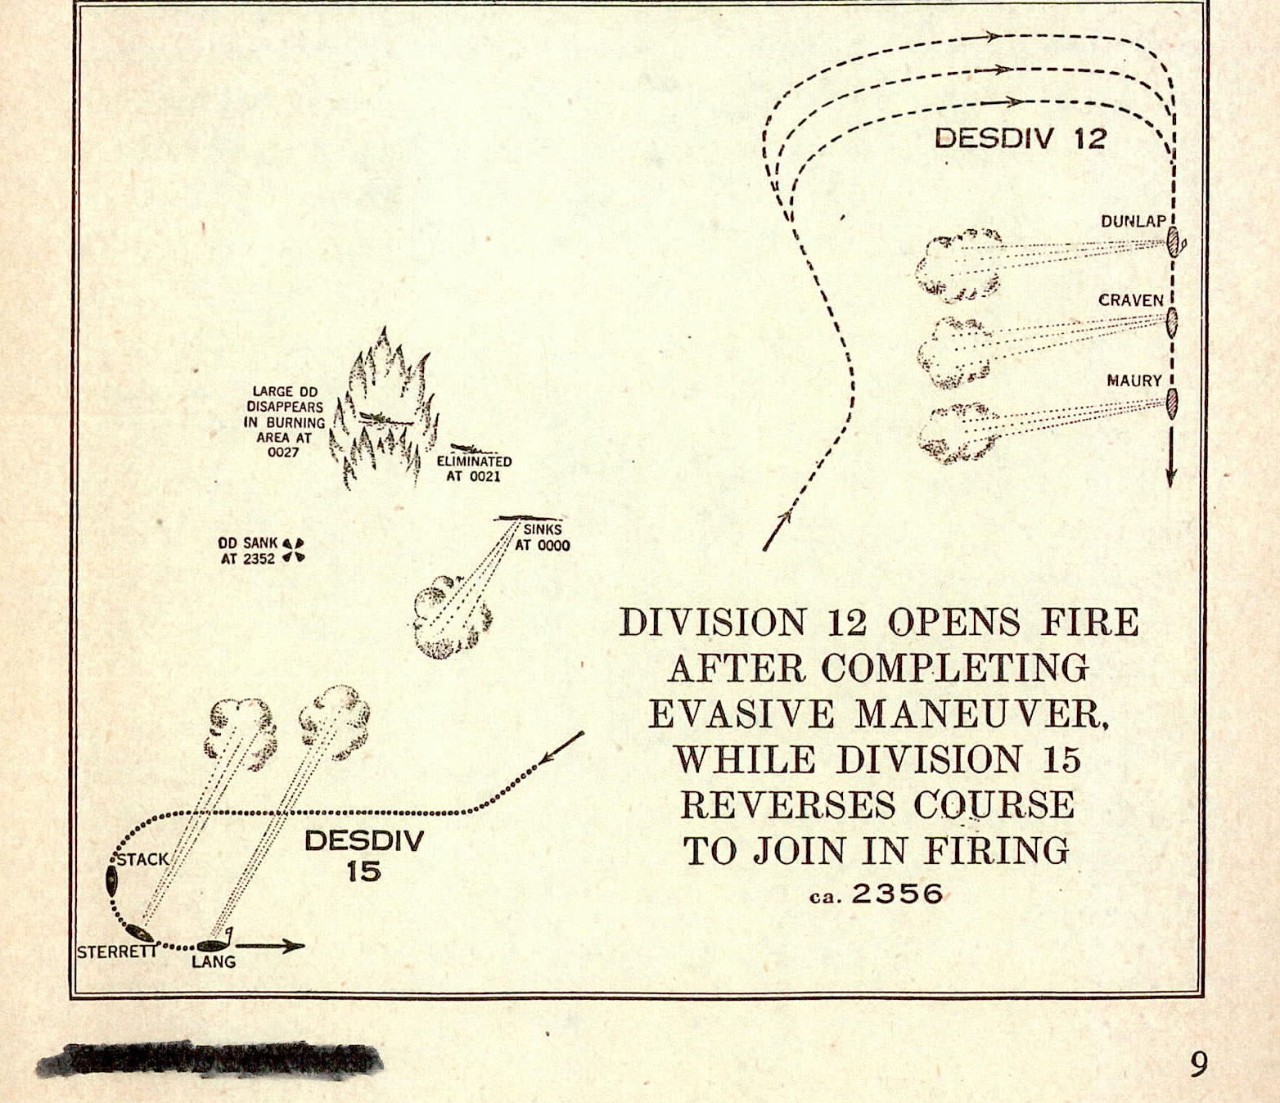 Division 12 opens fire adfter completing evasive maneuver 15 reverses course to join in firing